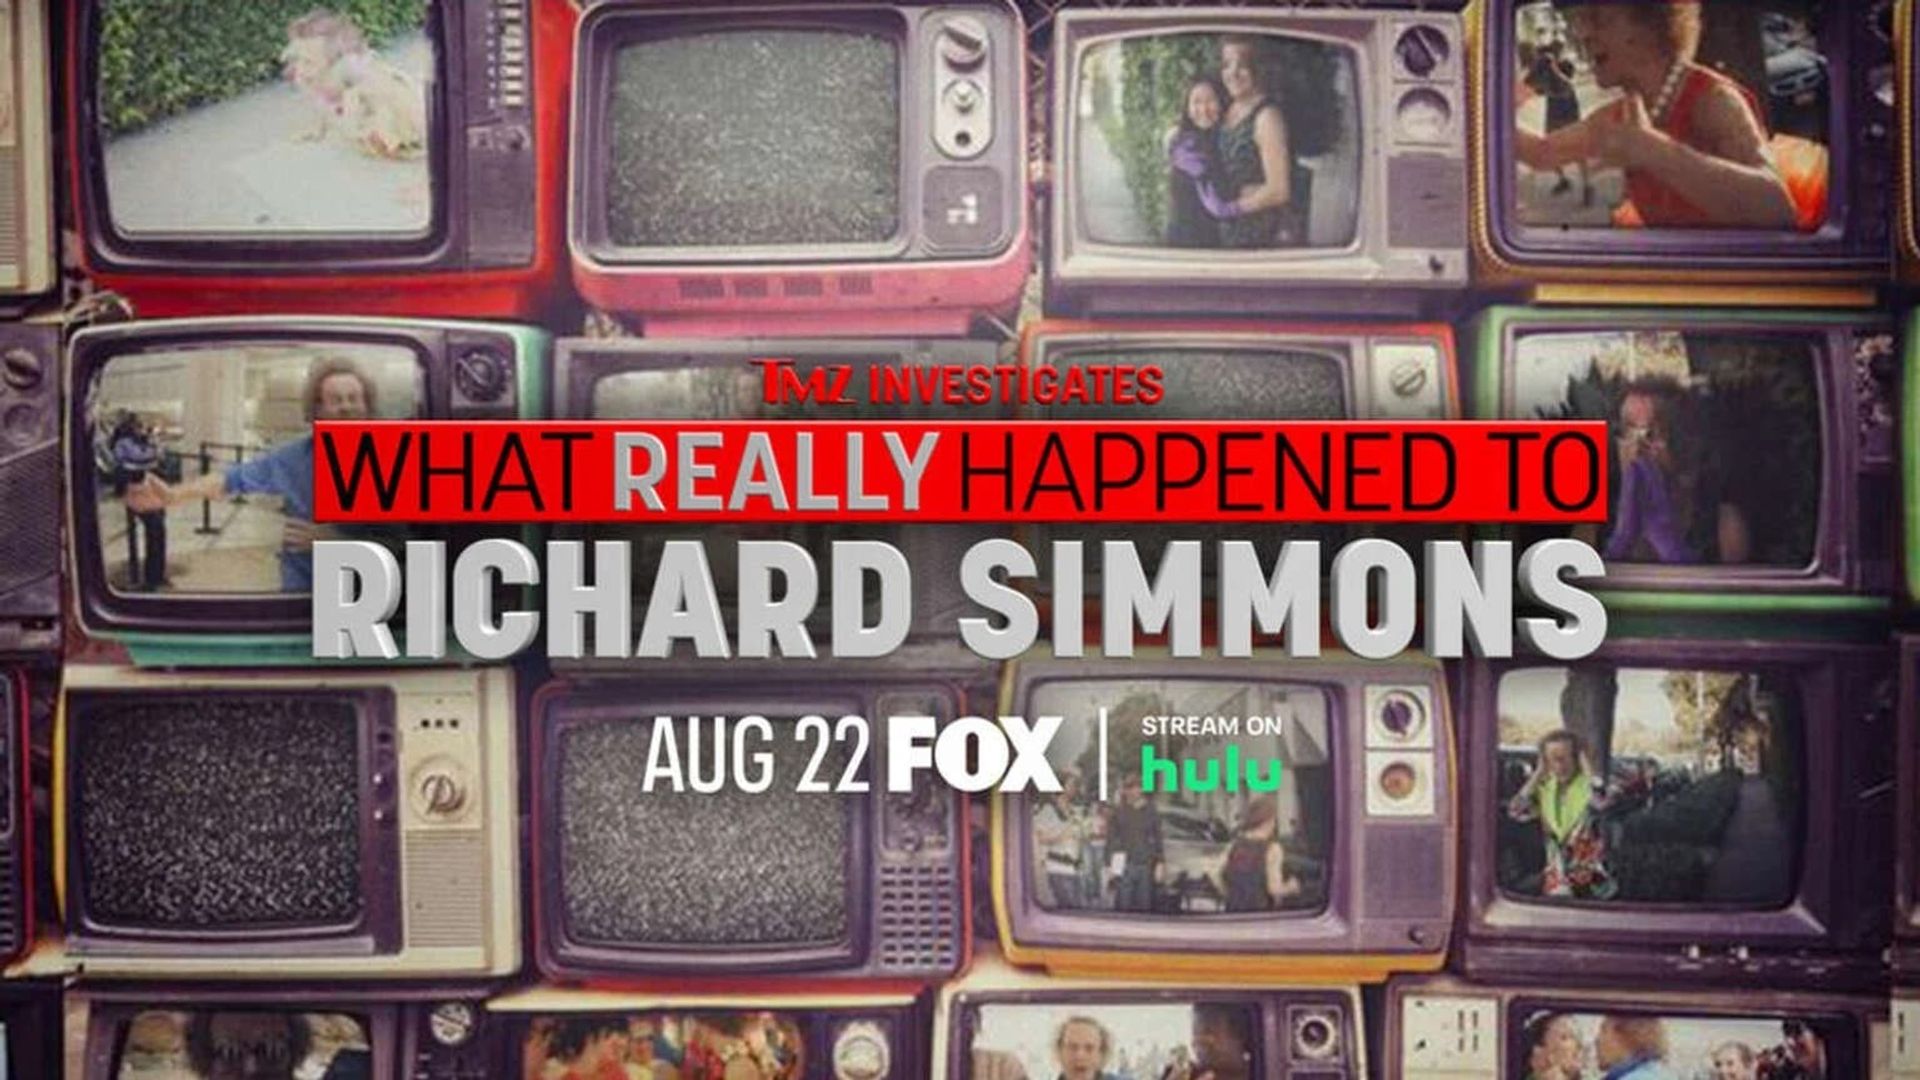 TMZ Investigates: What Really Happened to Richard Simmons background